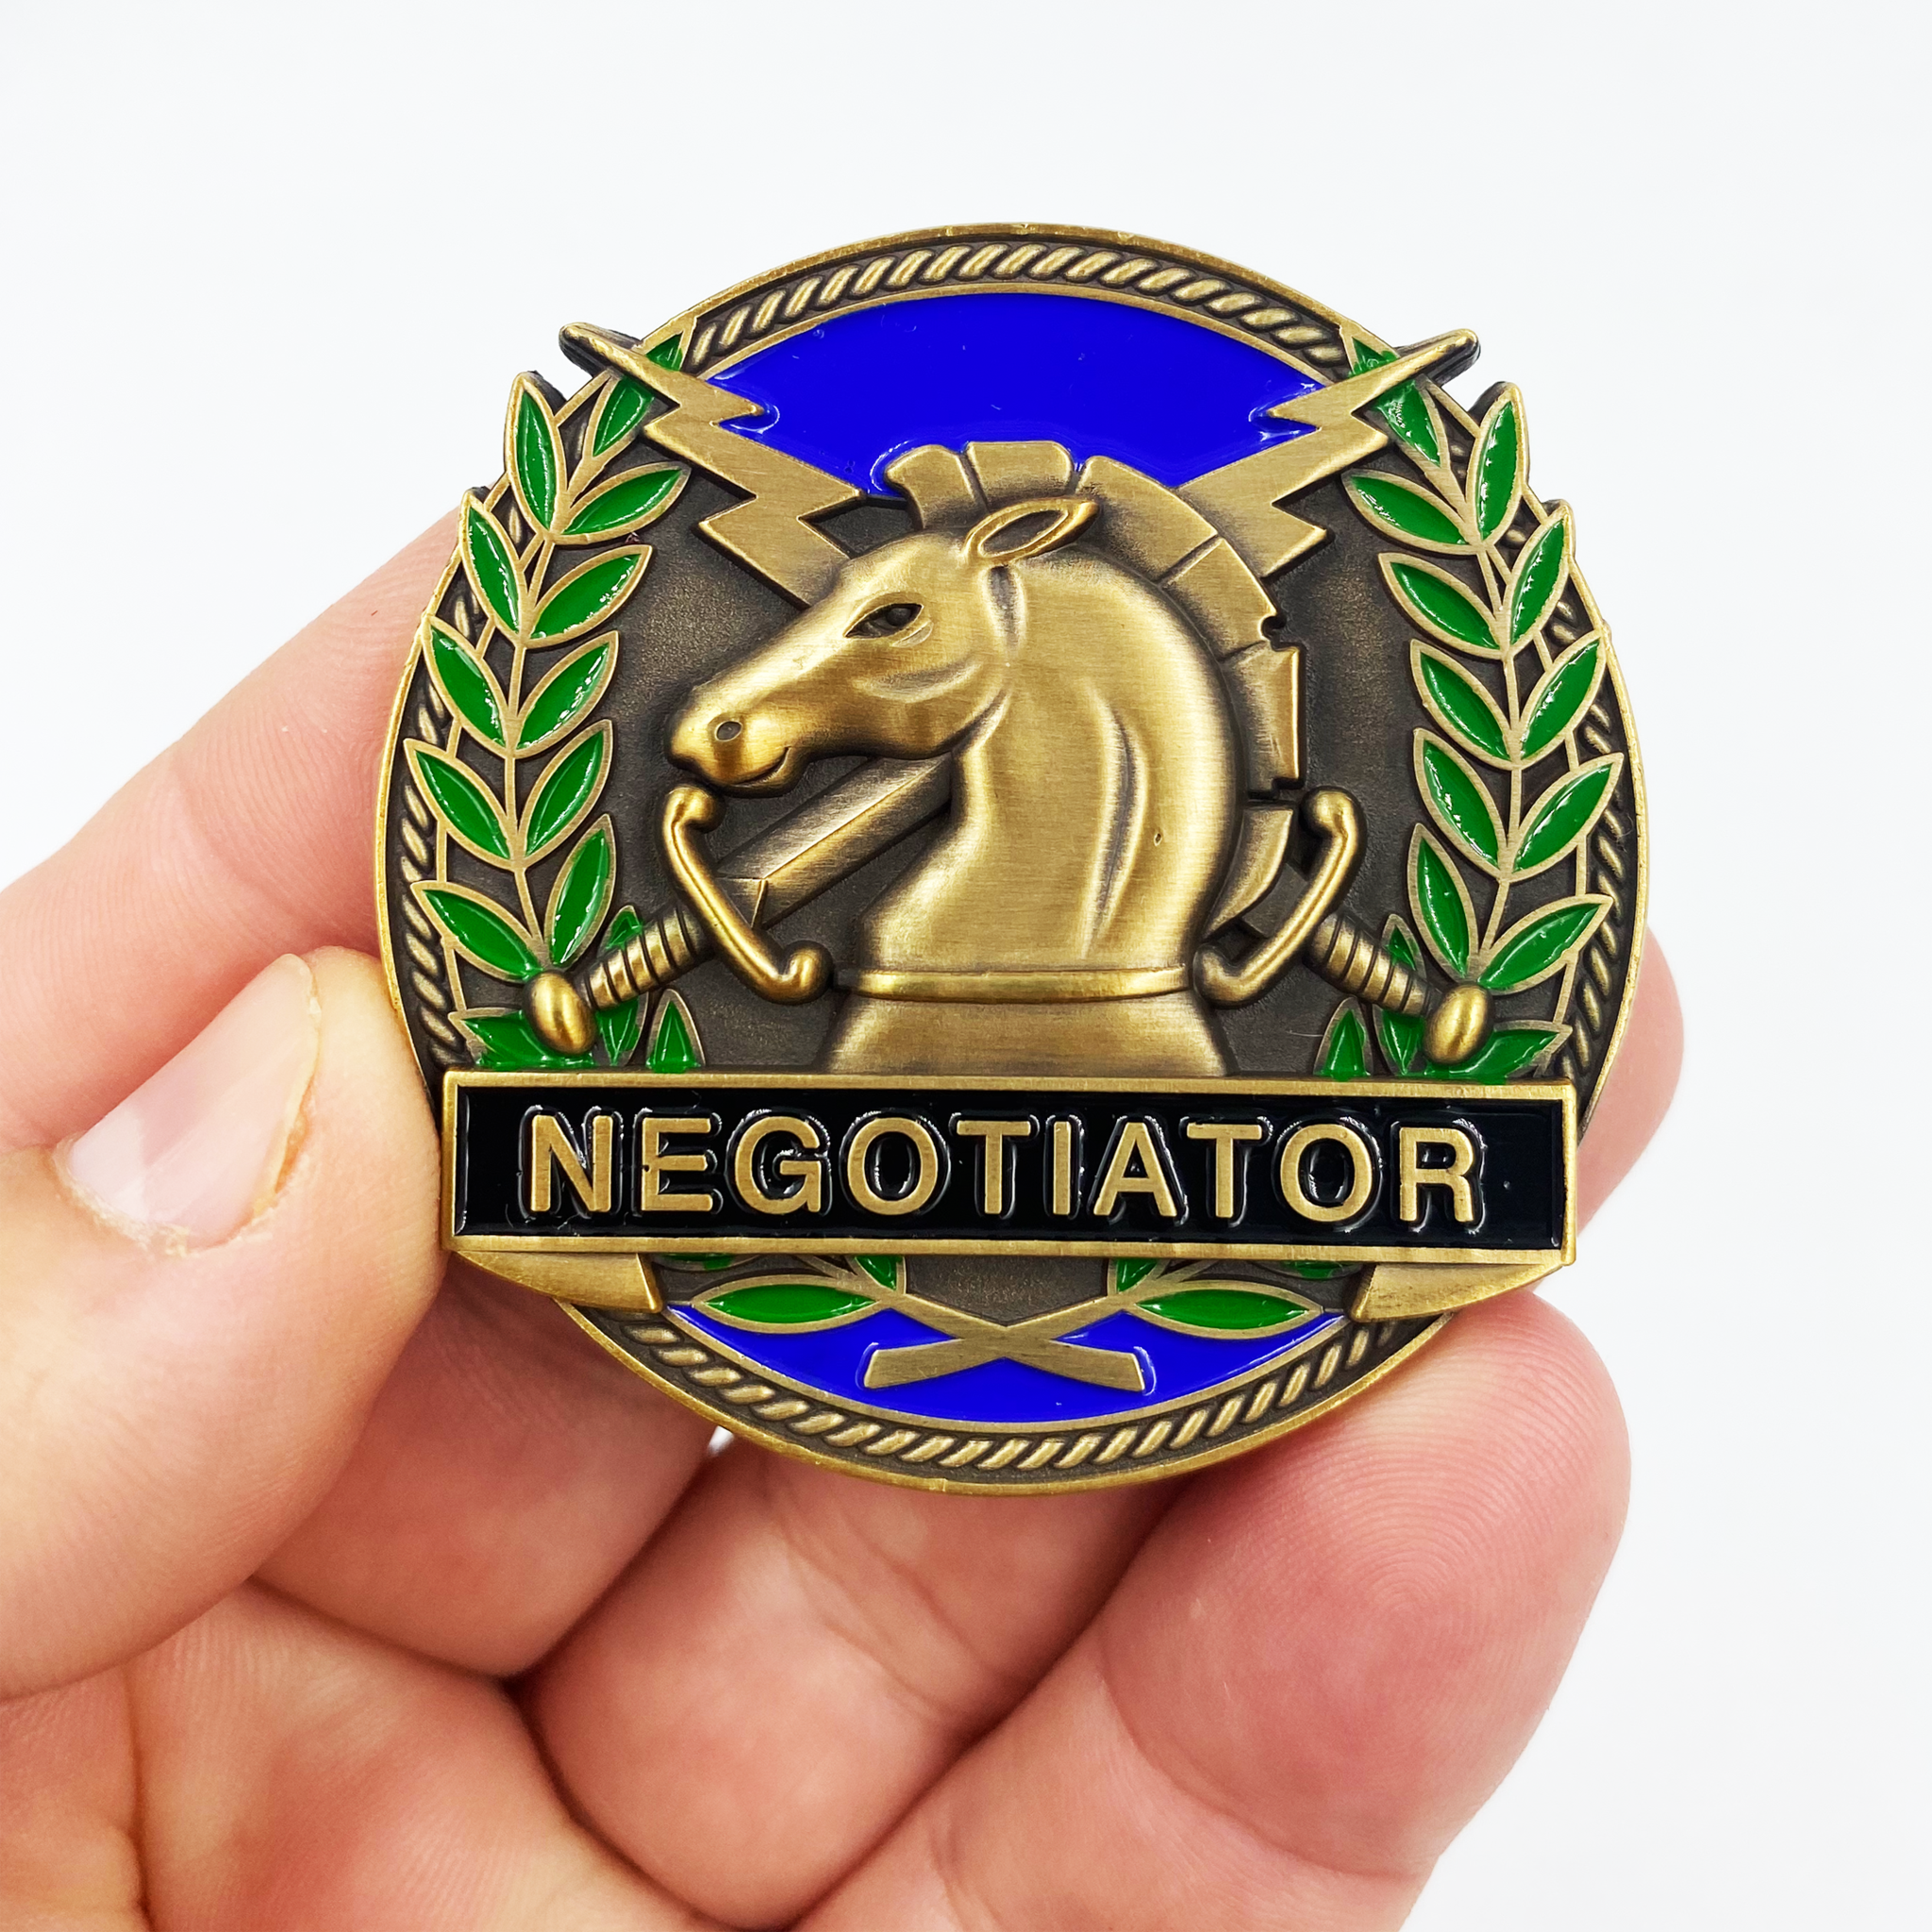 Challenge Coin Minneapolis Negotiator BSO Police LAPD NYPD CHP CL3-05 CPD